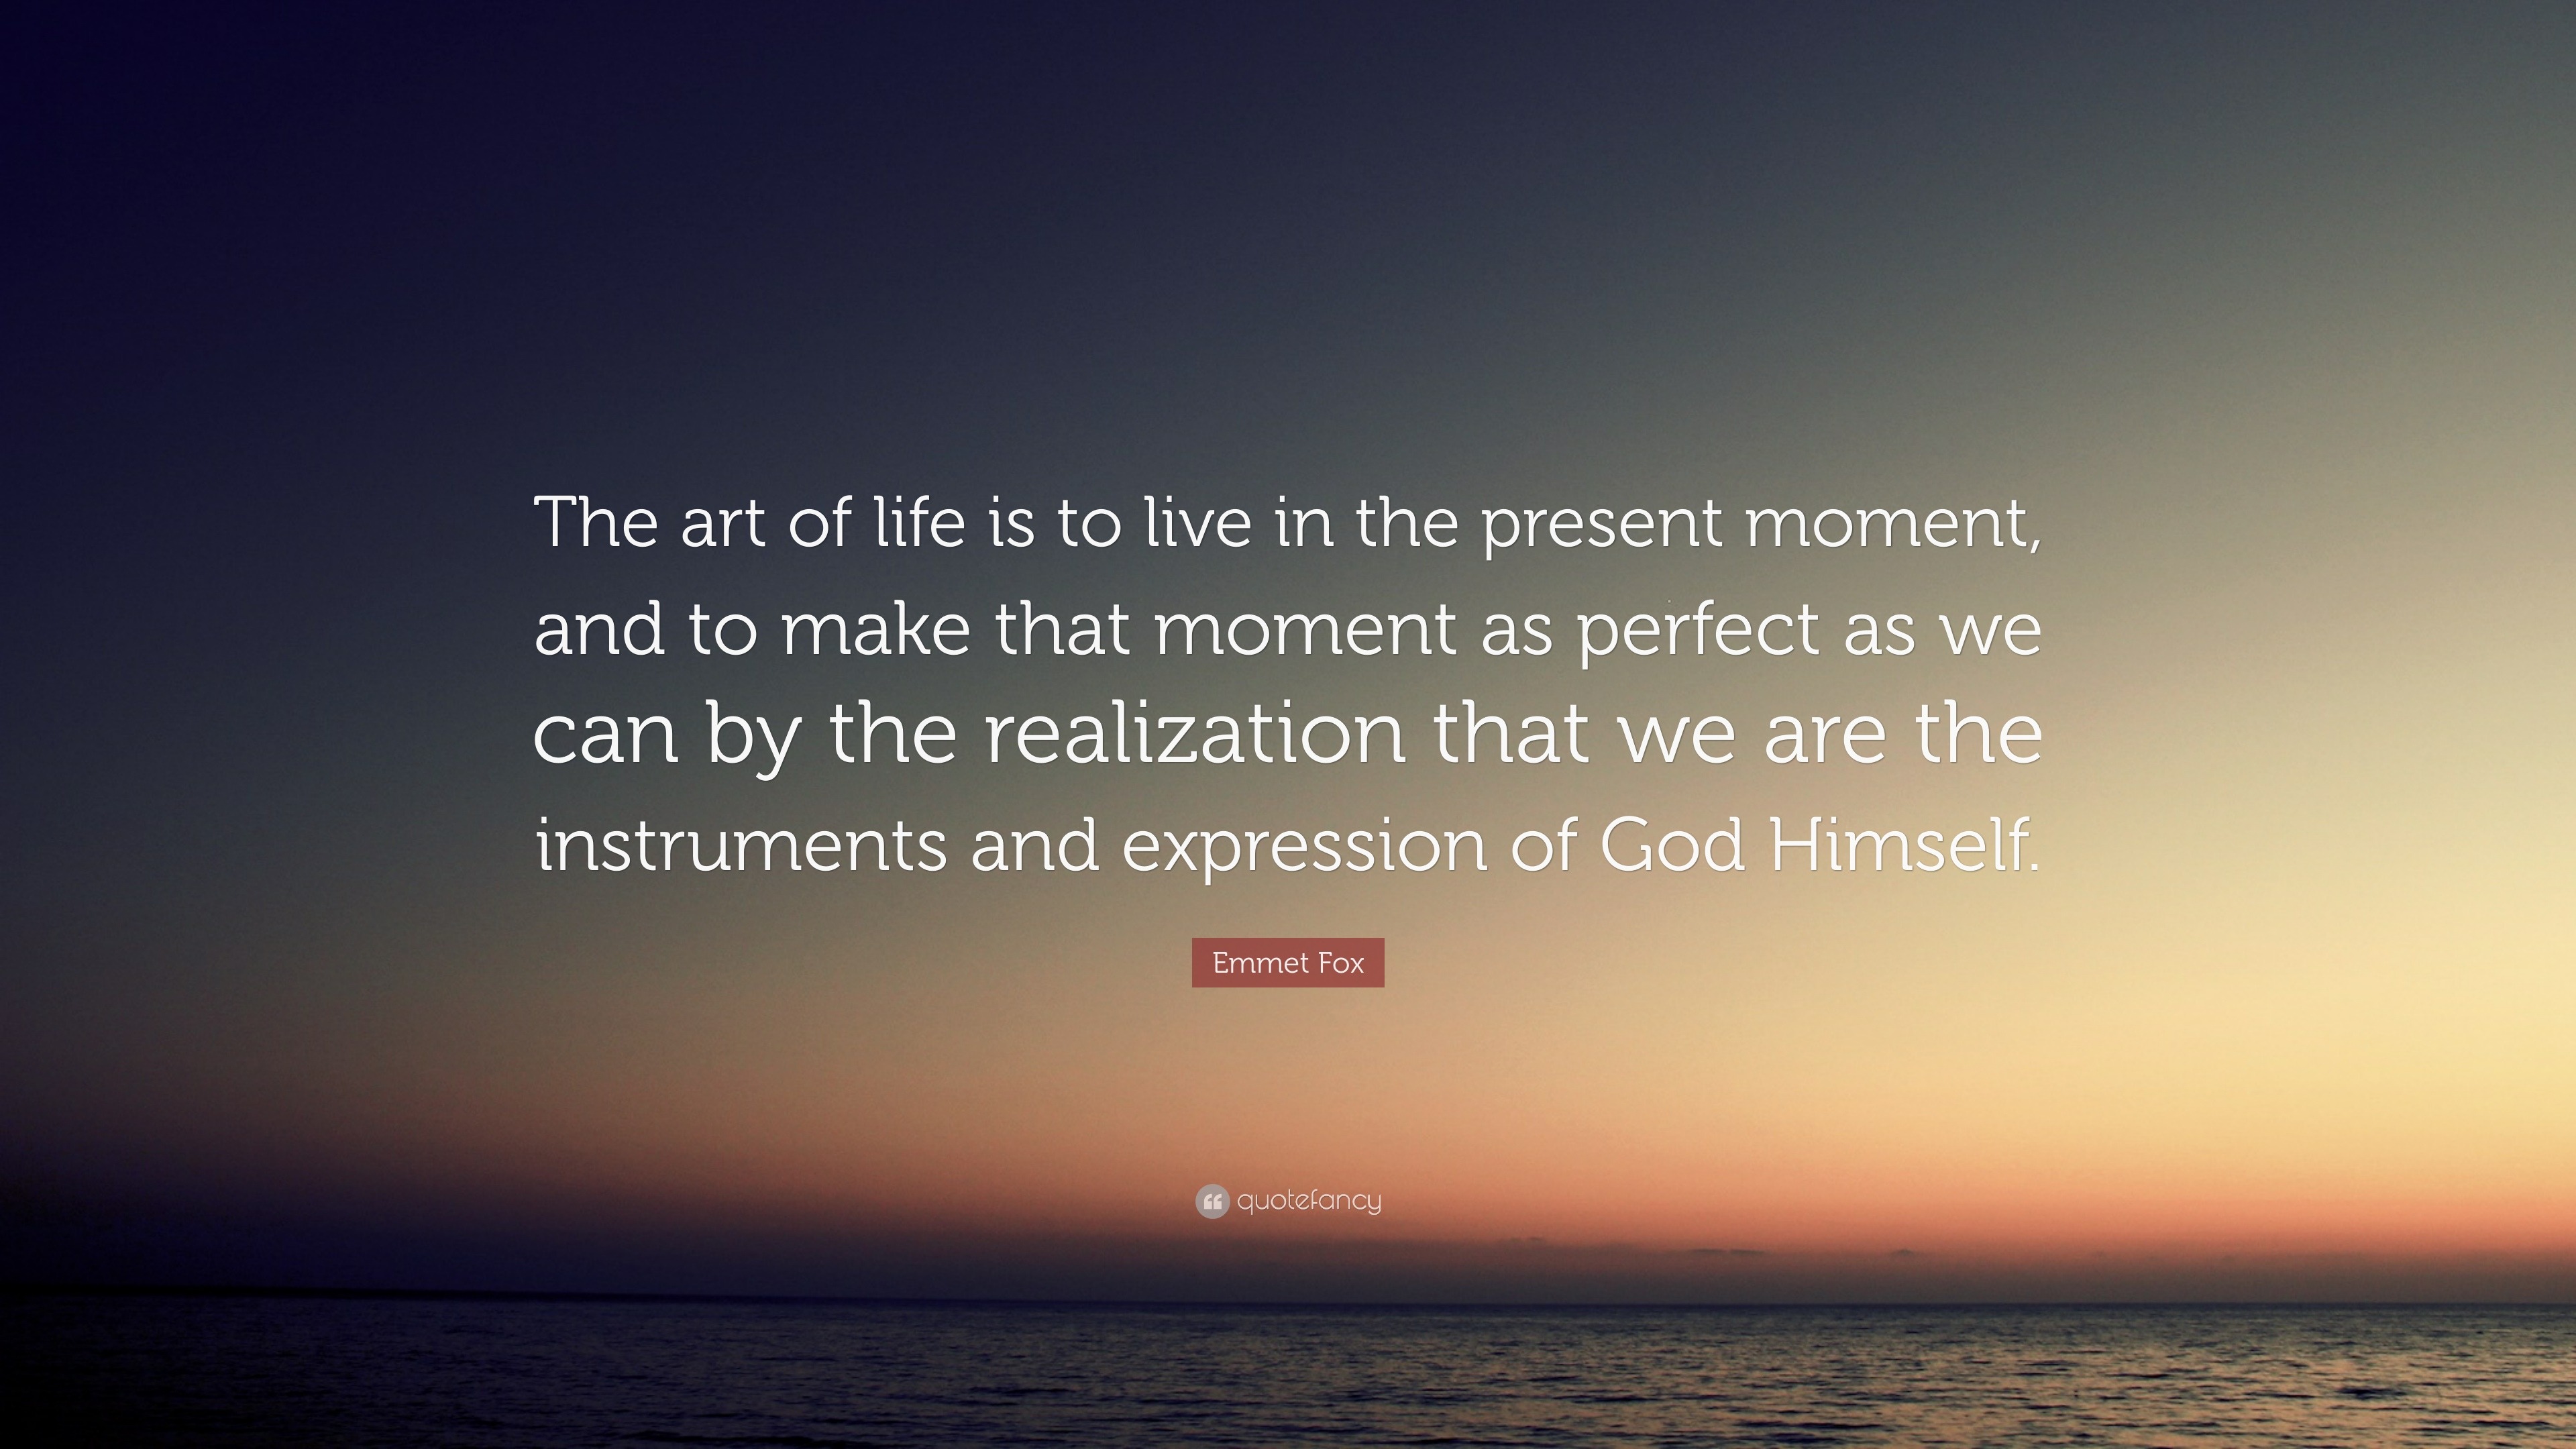 Emmet Fox Quote: “The art of life is to live in the present moment, and ...